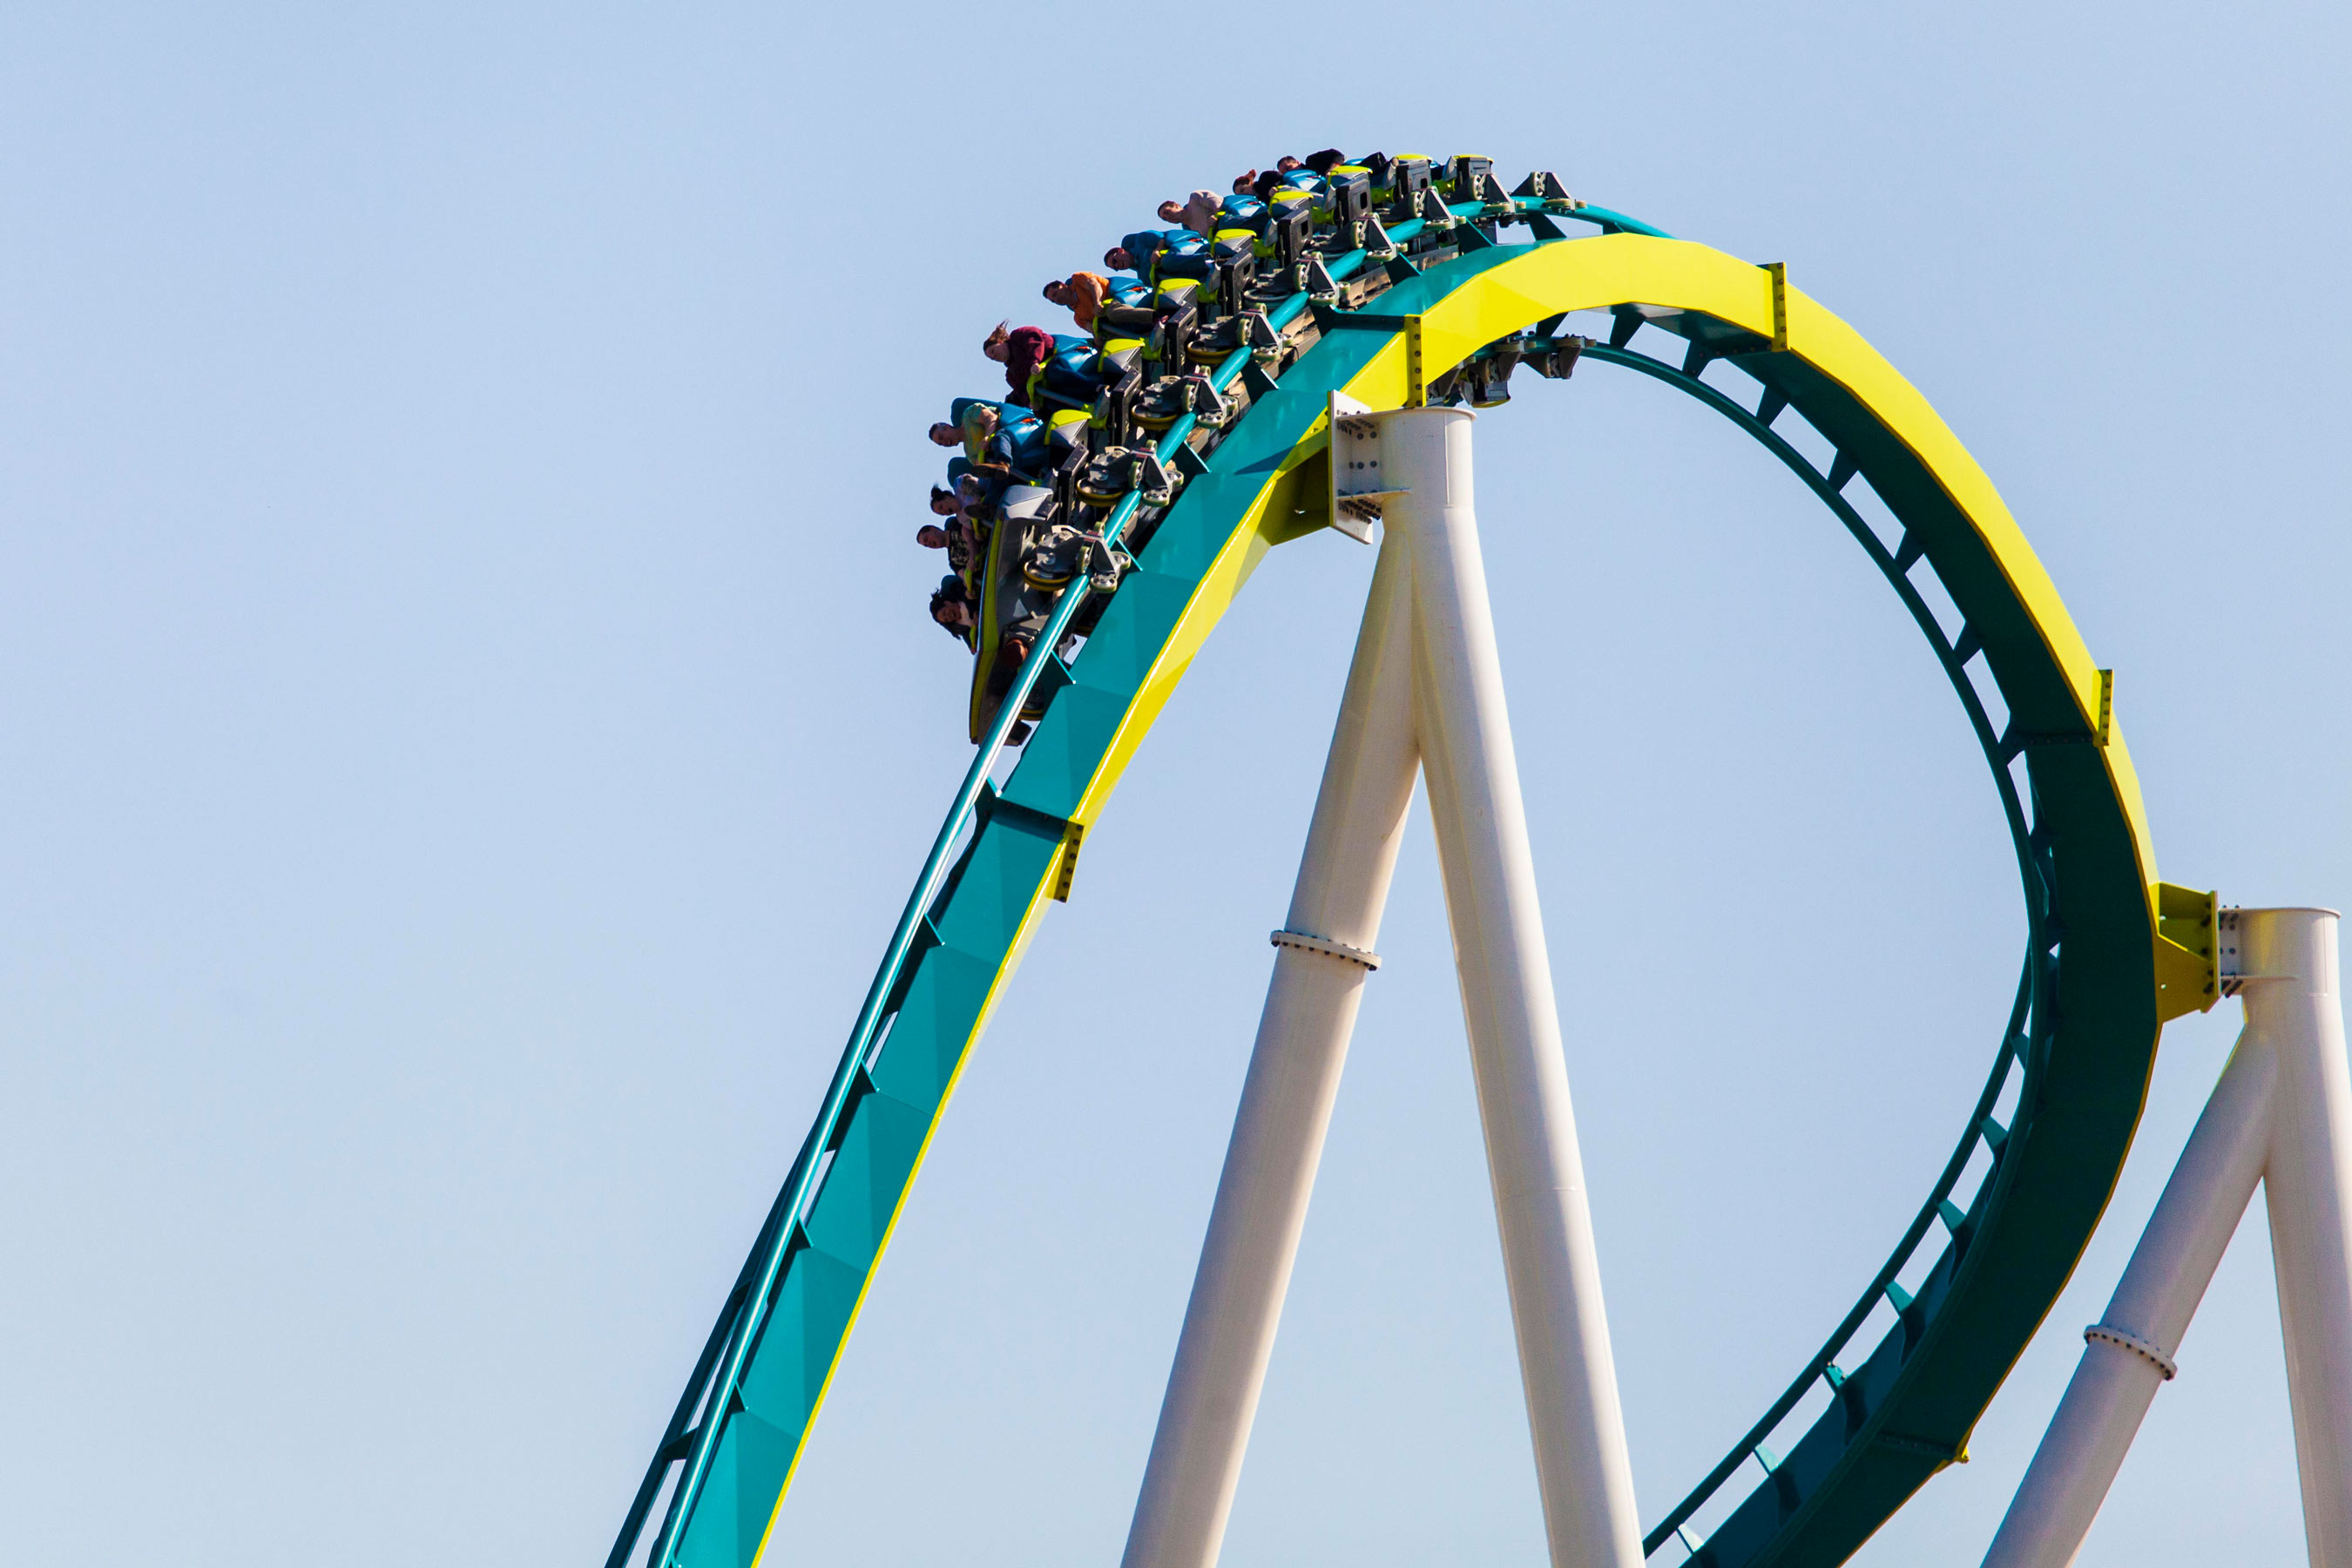 After Fury 325's open air trains careen over the main entrance, they immediately climb into a towering turnaround featuring a 91-degree overbanked horseshoe turn. Riders feel a moment of weightlessness just before they dive into an underground tunnel.